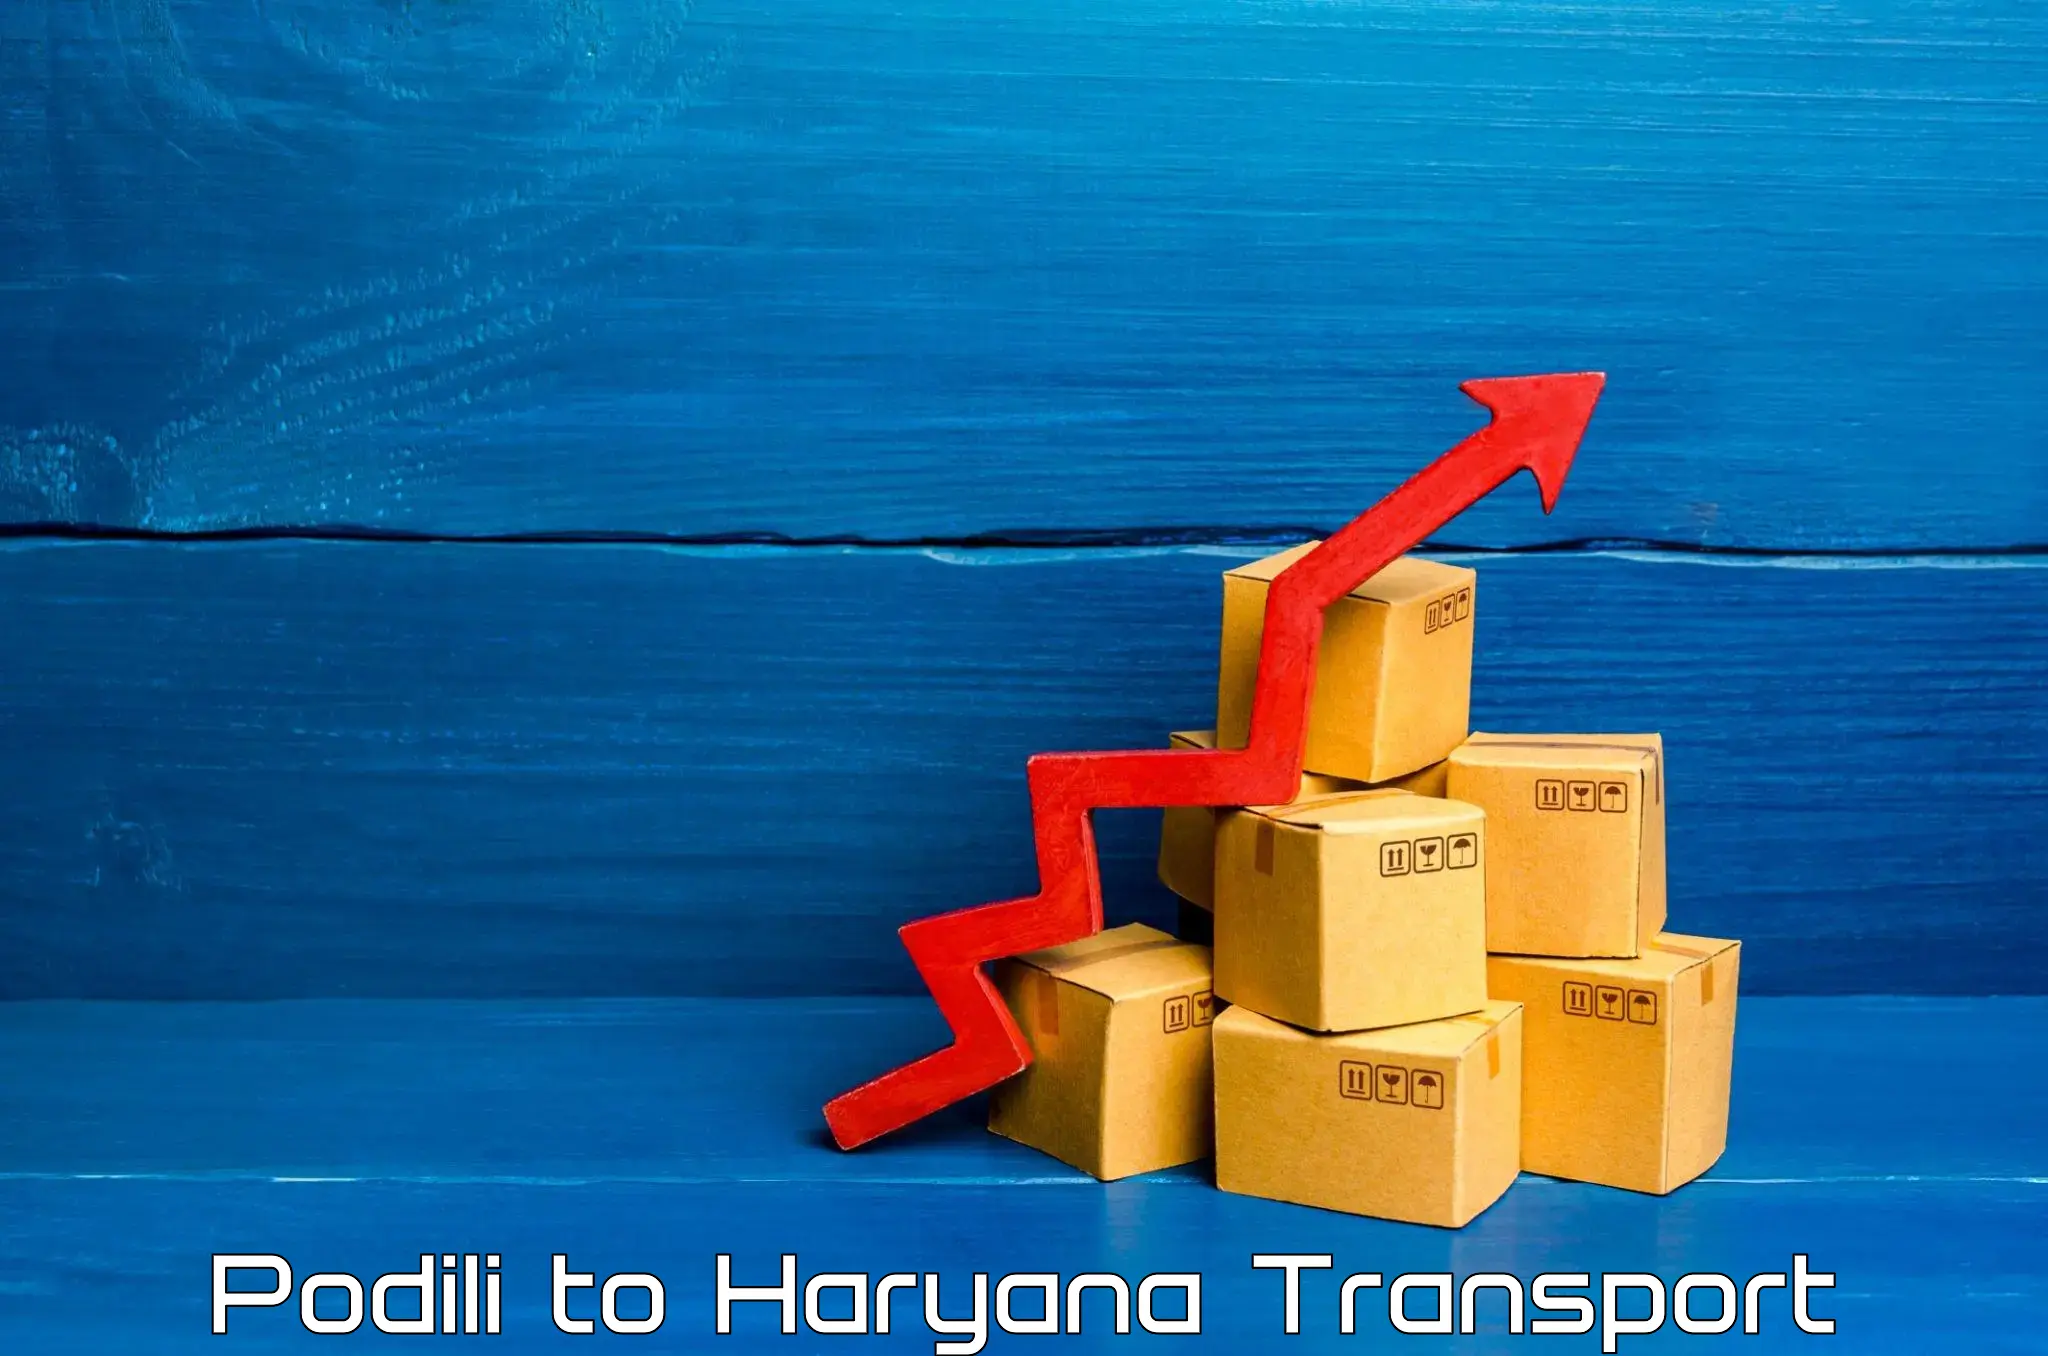 Container transportation services Podili to Kalanwali